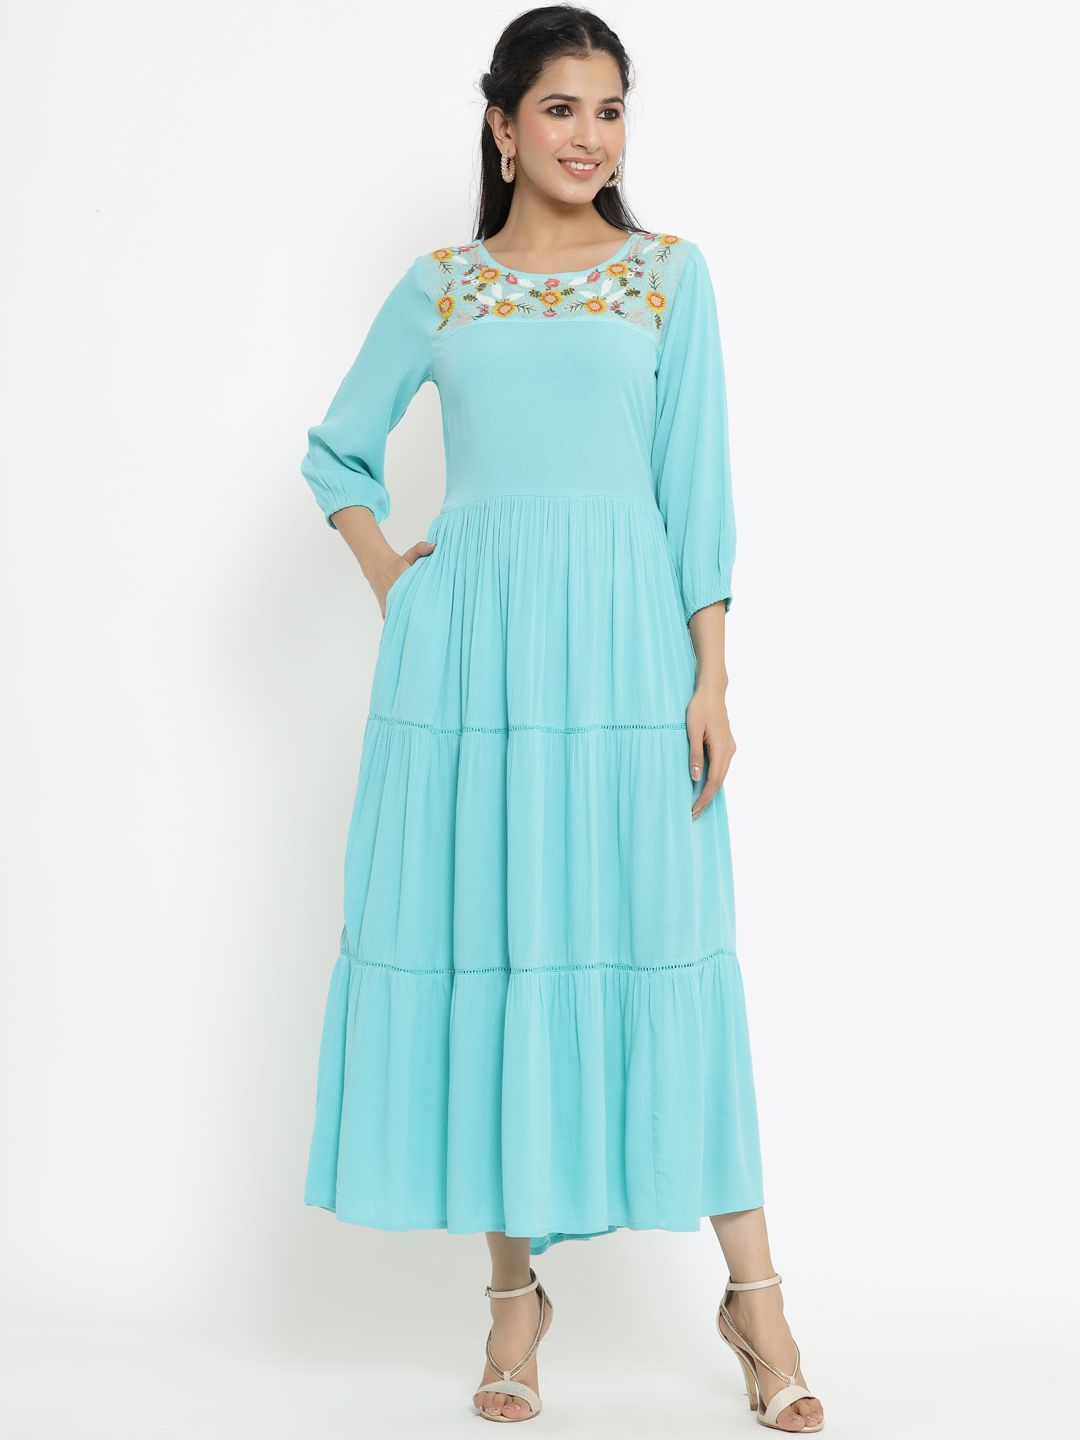 Women's Turq Rayon Crepe Embroidered Tiered Dress - Juniper